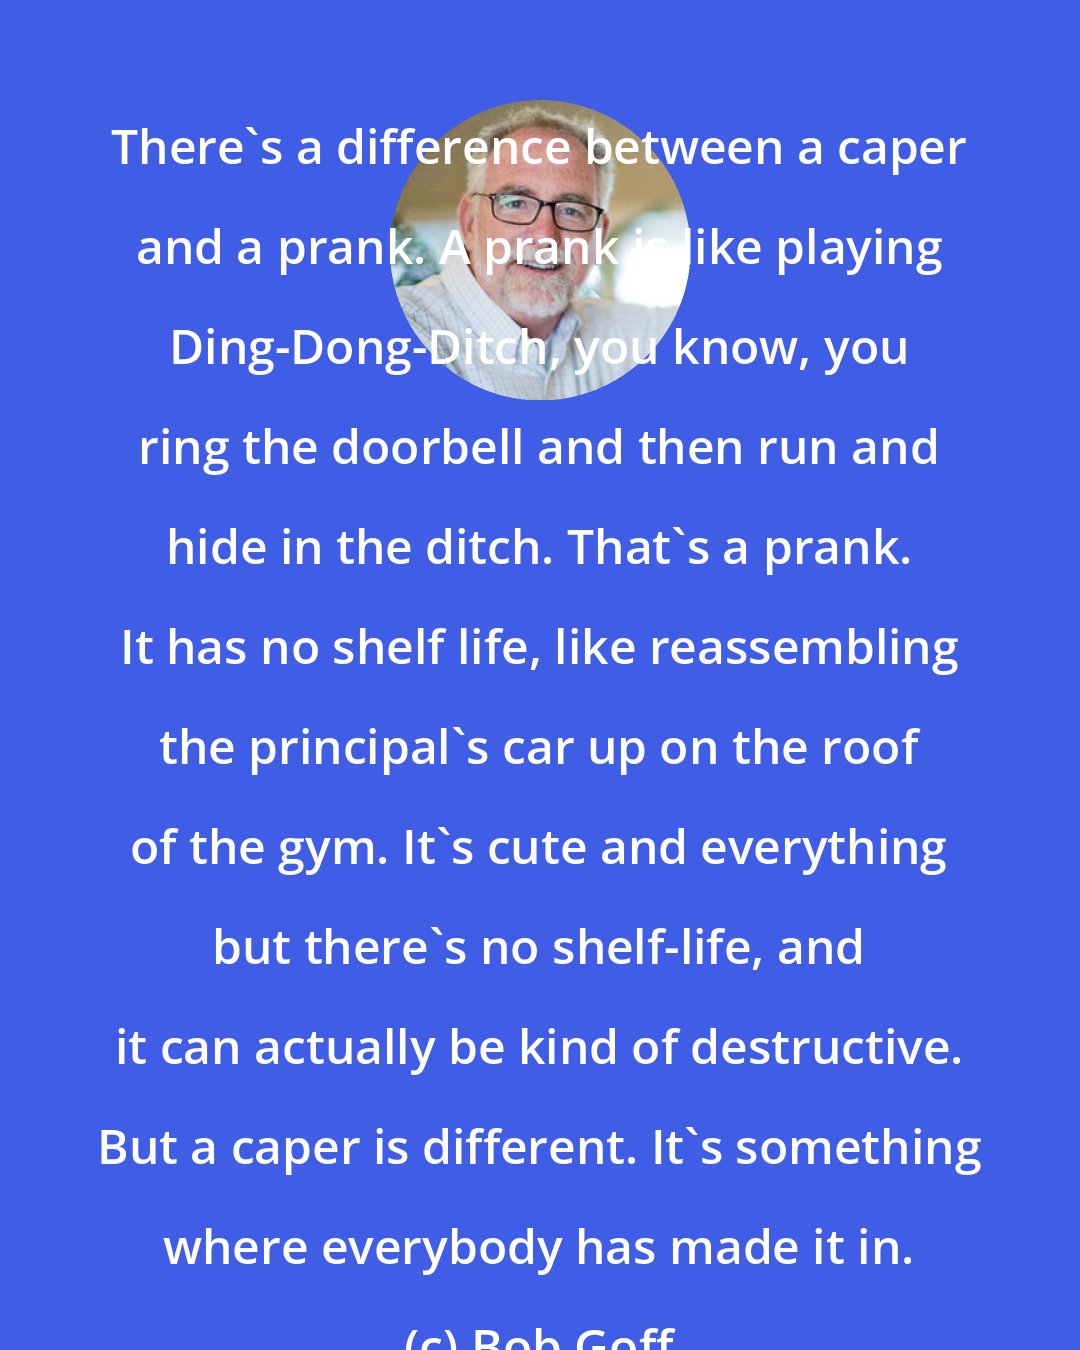 Bob Goff: There's a difference between a caper and a prank. A prank is like playing Ding-Dong-Ditch, you know, you ring the doorbell and then run and hide in the ditch. That's a prank. It has no shelf life, like reassembling the principal's car up on the roof of the gym. It's cute and everything but there's no shelf-life, and it can actually be kind of destructive. But a caper is different. It's something where everybody has made it in.